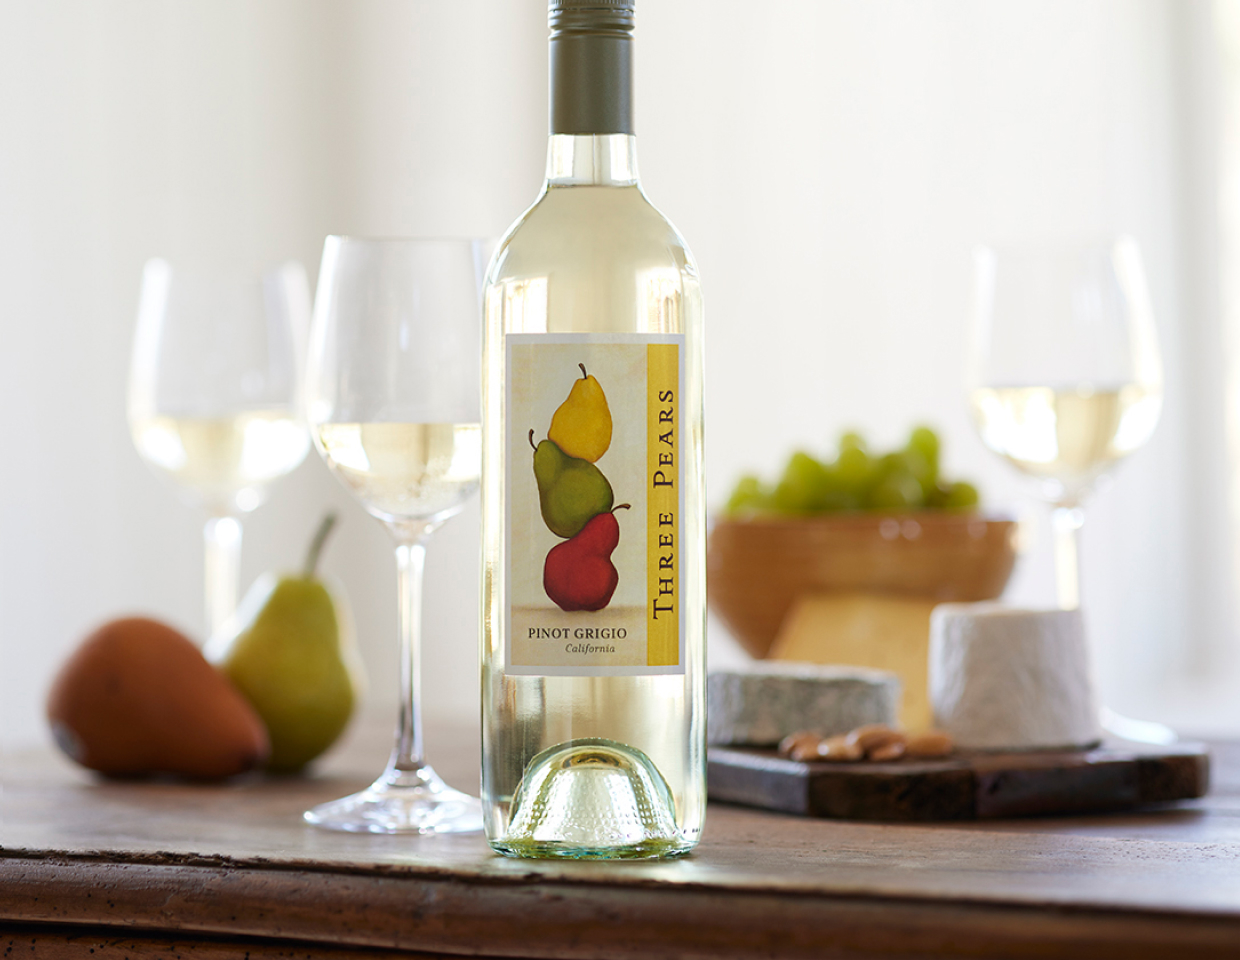 Bottle of Three Pears pinot grigio on a table with glasses of wine, cheese, and fruit